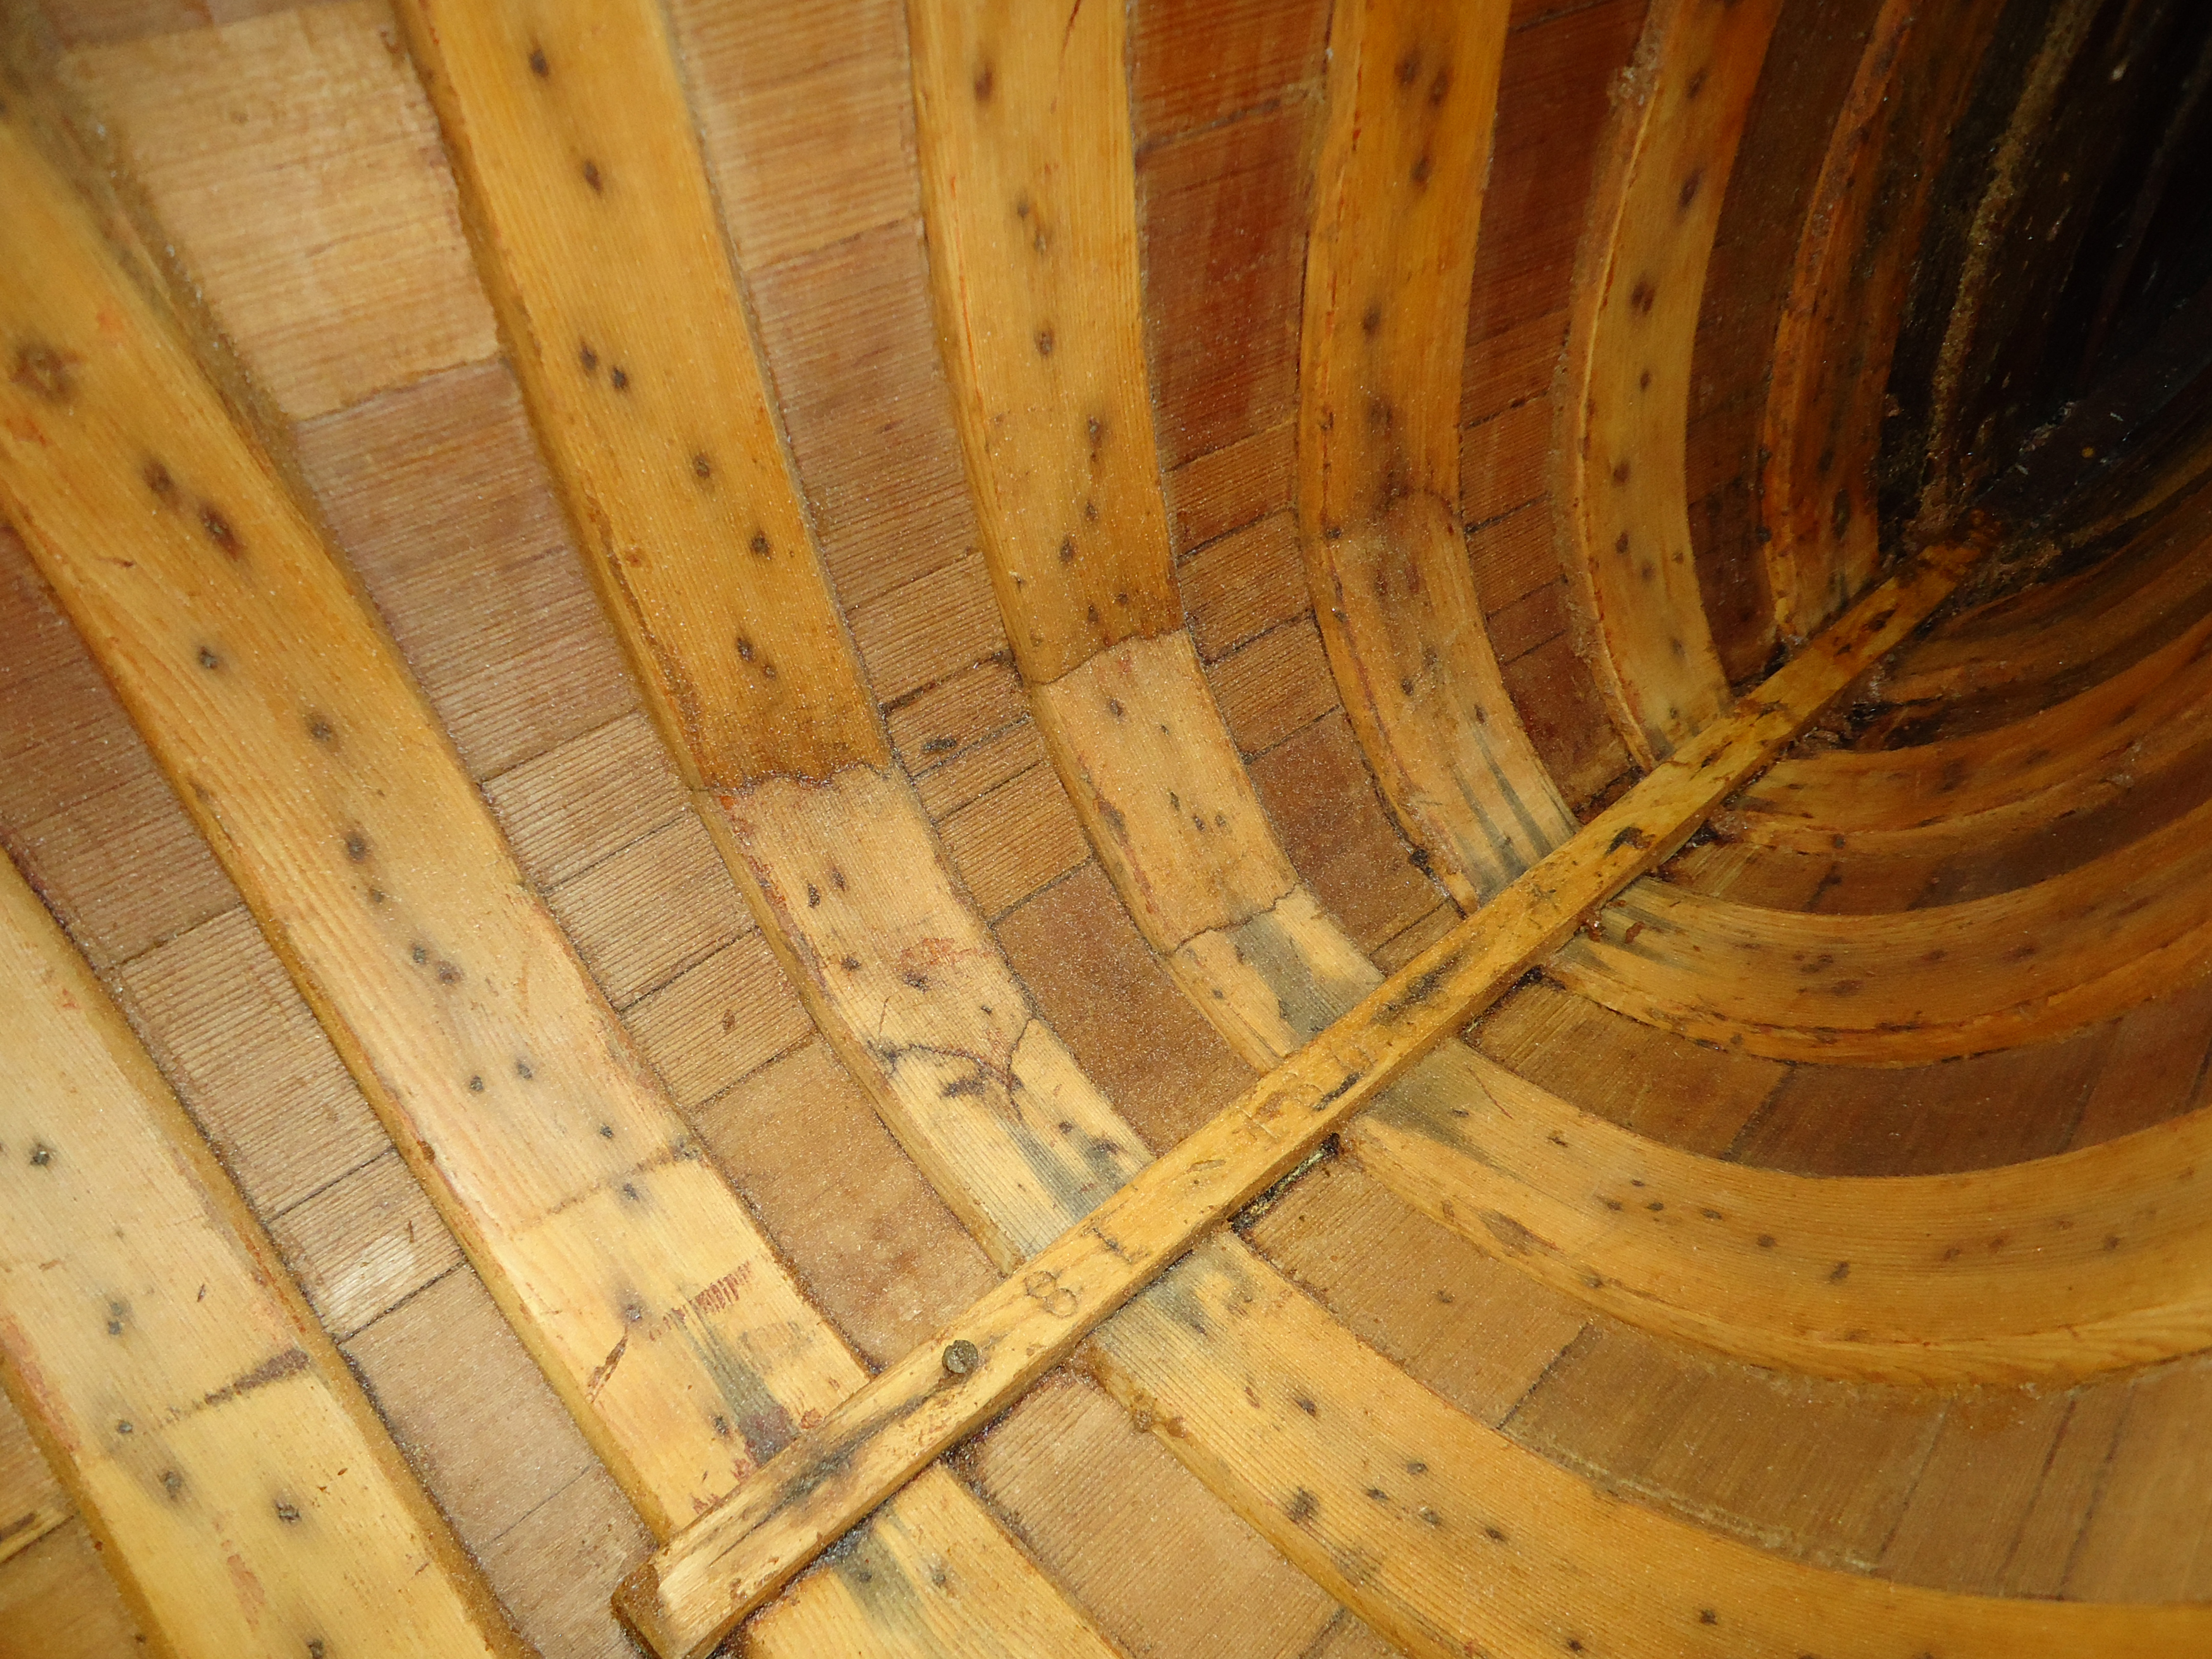  will it take to fix them all up?” | The Canadian Canoe Museum's Blog